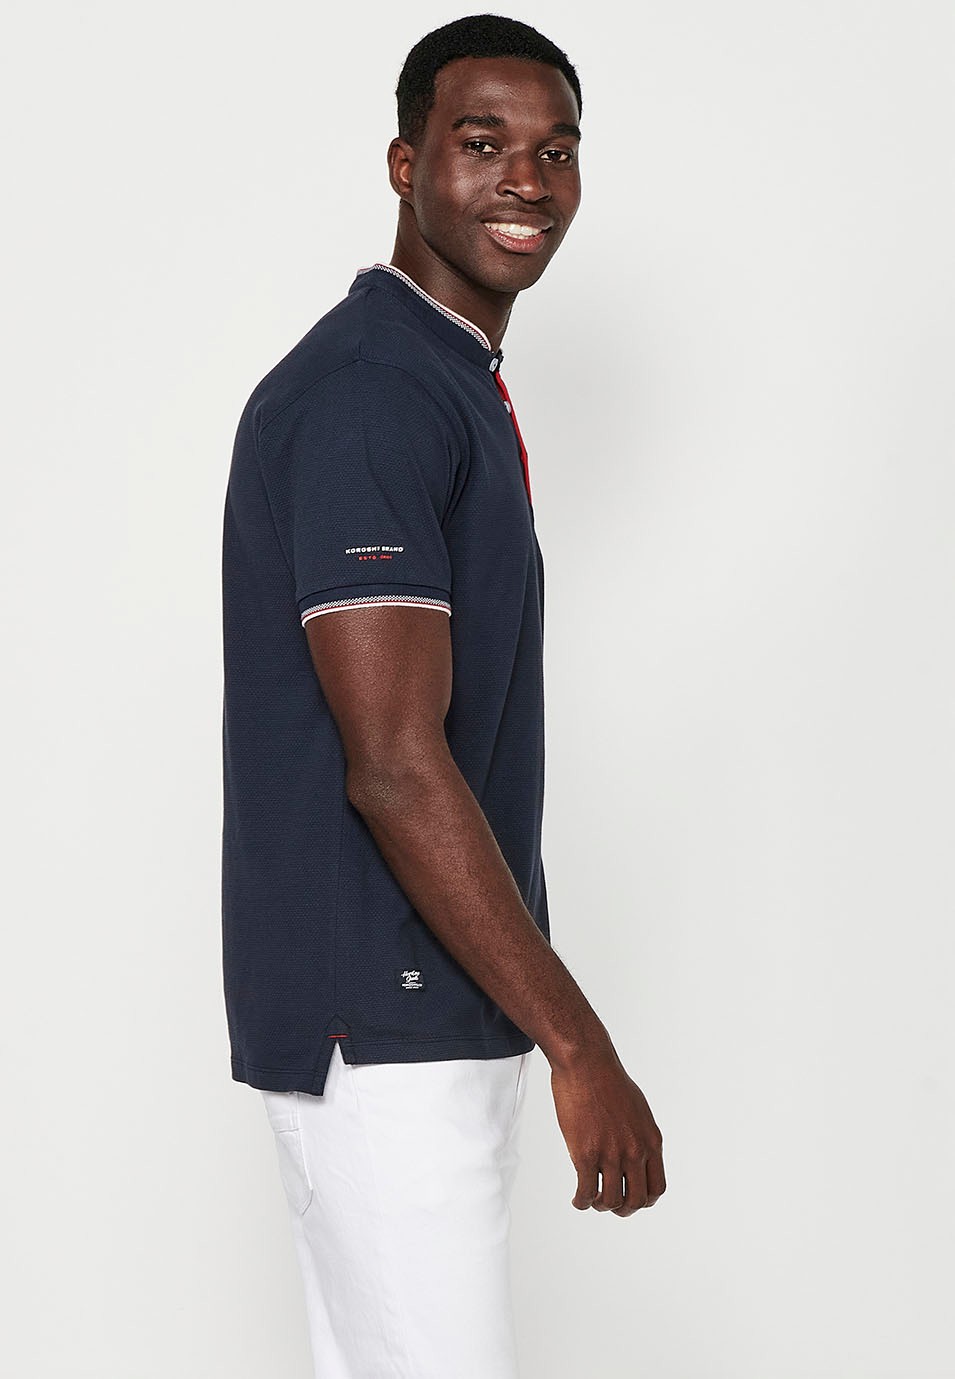 Short-sleeved cotton polo shirt with ribbed finish with round neck, buttoned opening and textured side slits in Navy Color for Men 5